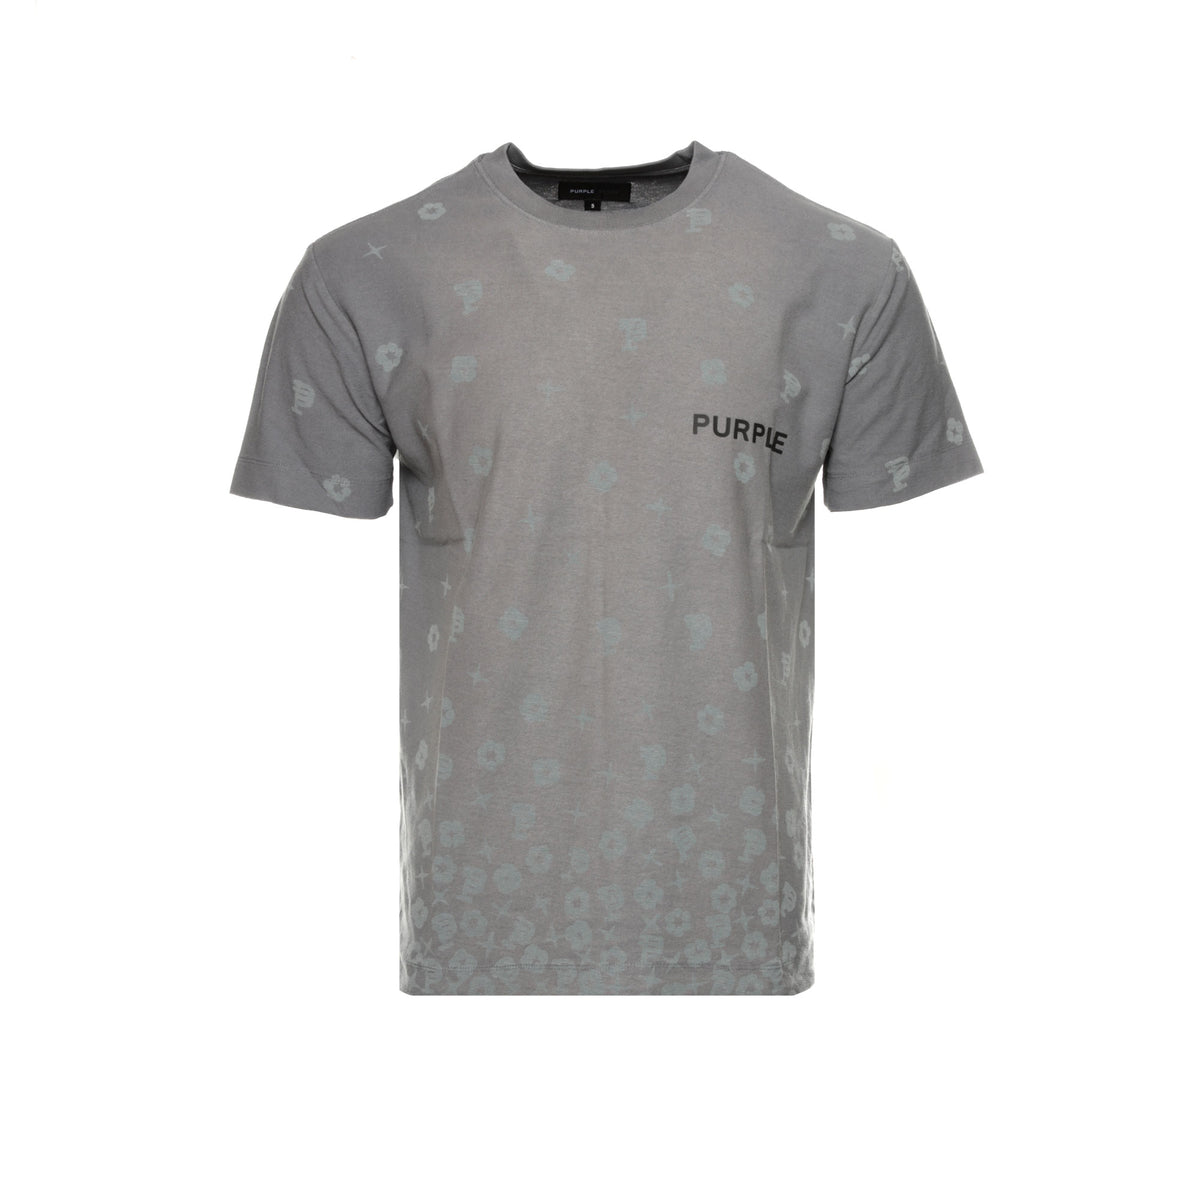 Purple Brand Grey Scattered Monogram Men's SS Tee - SIZE Boutique